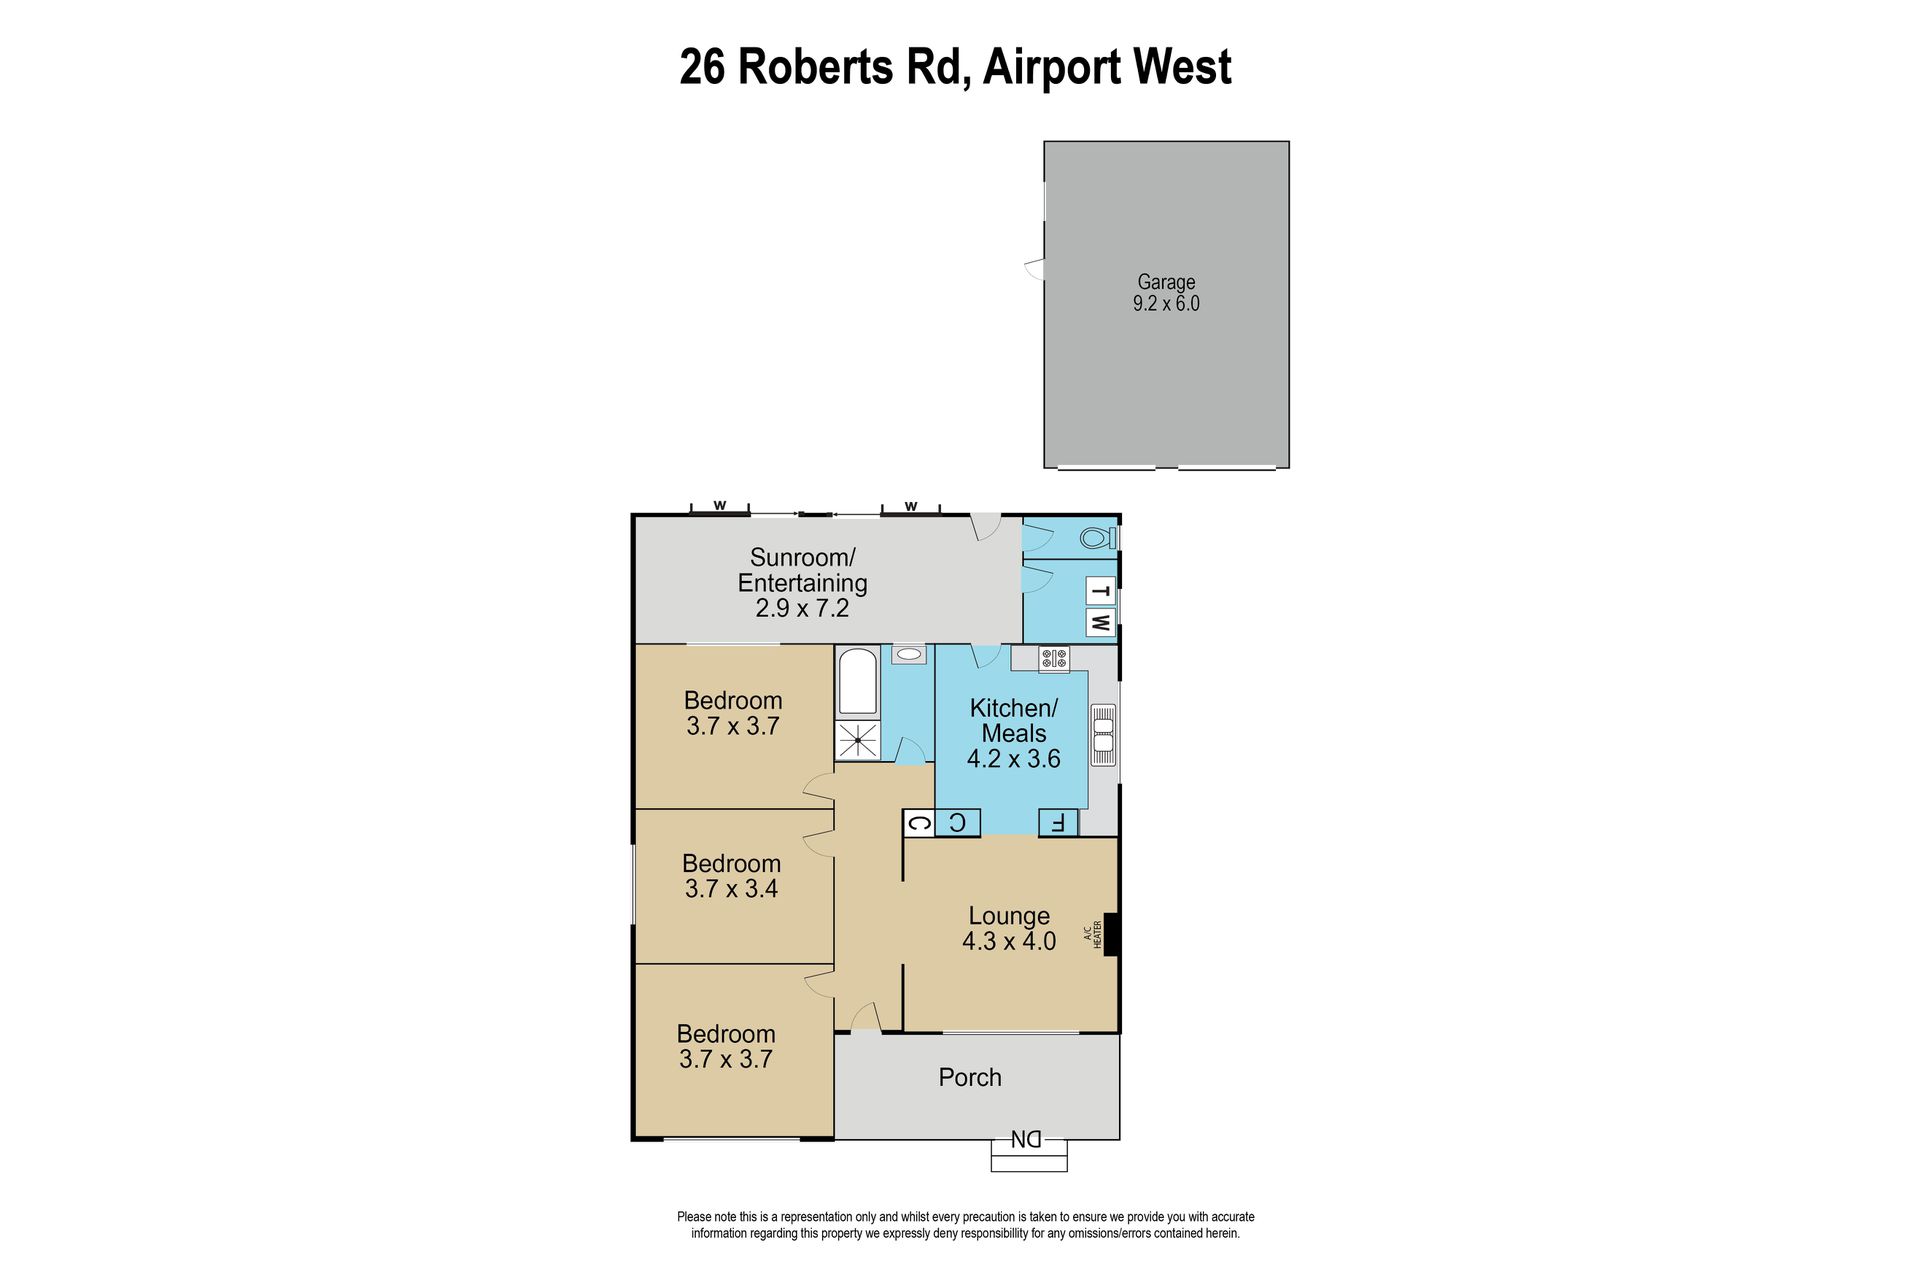 26 Roberts Road, Airport West